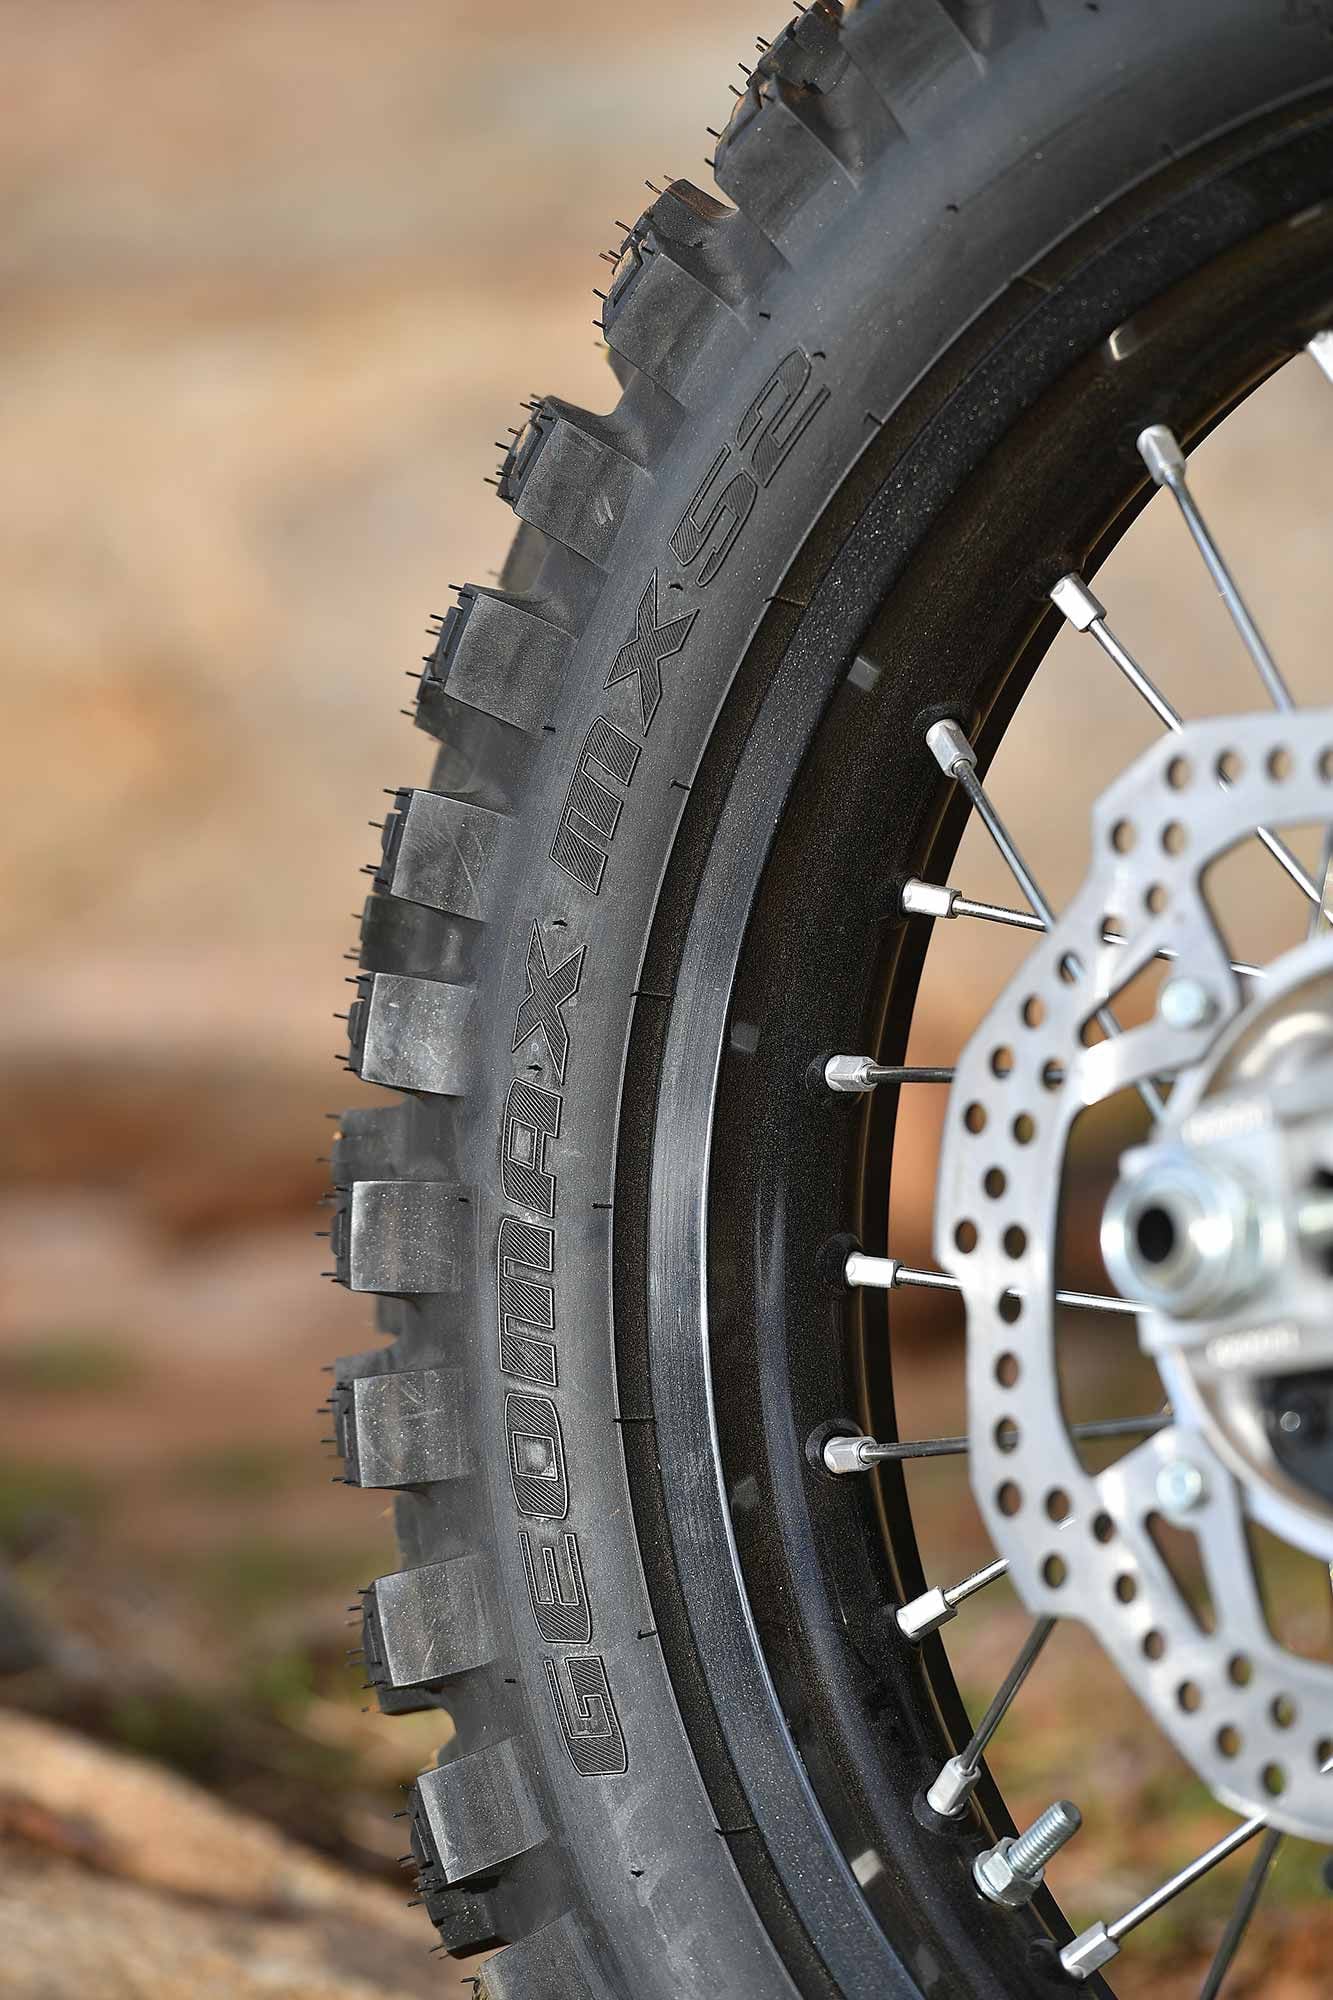 Dunlop Geomax MX52 tires are OEM rubber on the CRF450X. The new Dunlop Geomax MX53 line (which replaced the MX52s) or even Geomax AT81s would be worthy replacements when the time comes for current CRF450X owners.